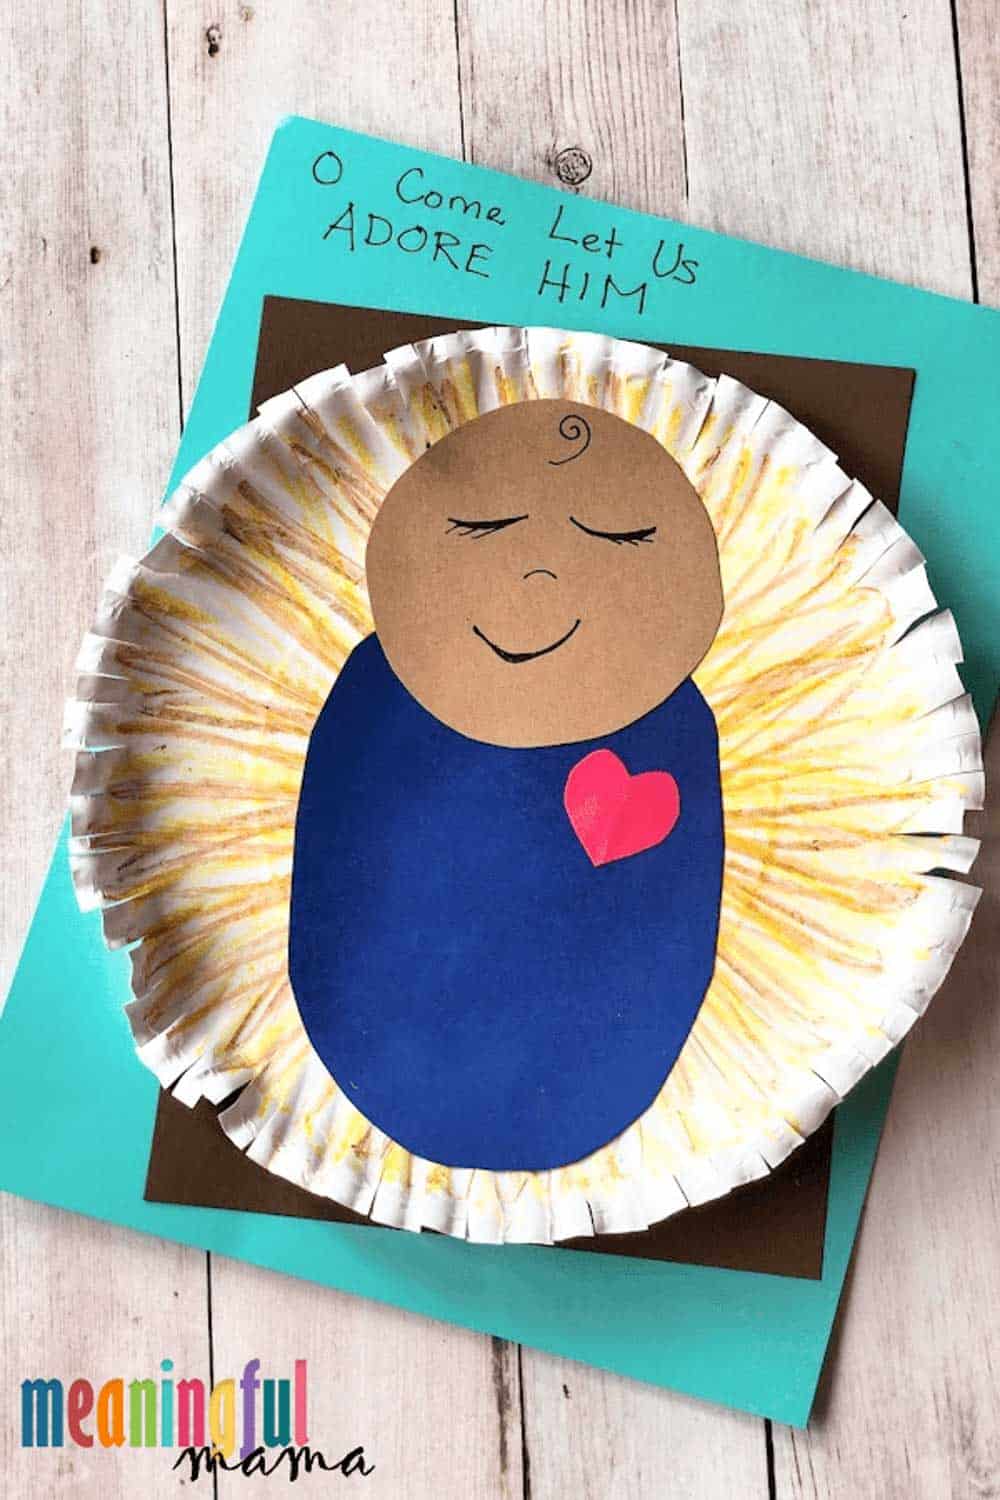 Fall in Love With Jesus Crafts for Kids, Fall Christian Crafts, Finger  Painting Keepsakes, Sunday School Crafts, Homeschool Crafts 